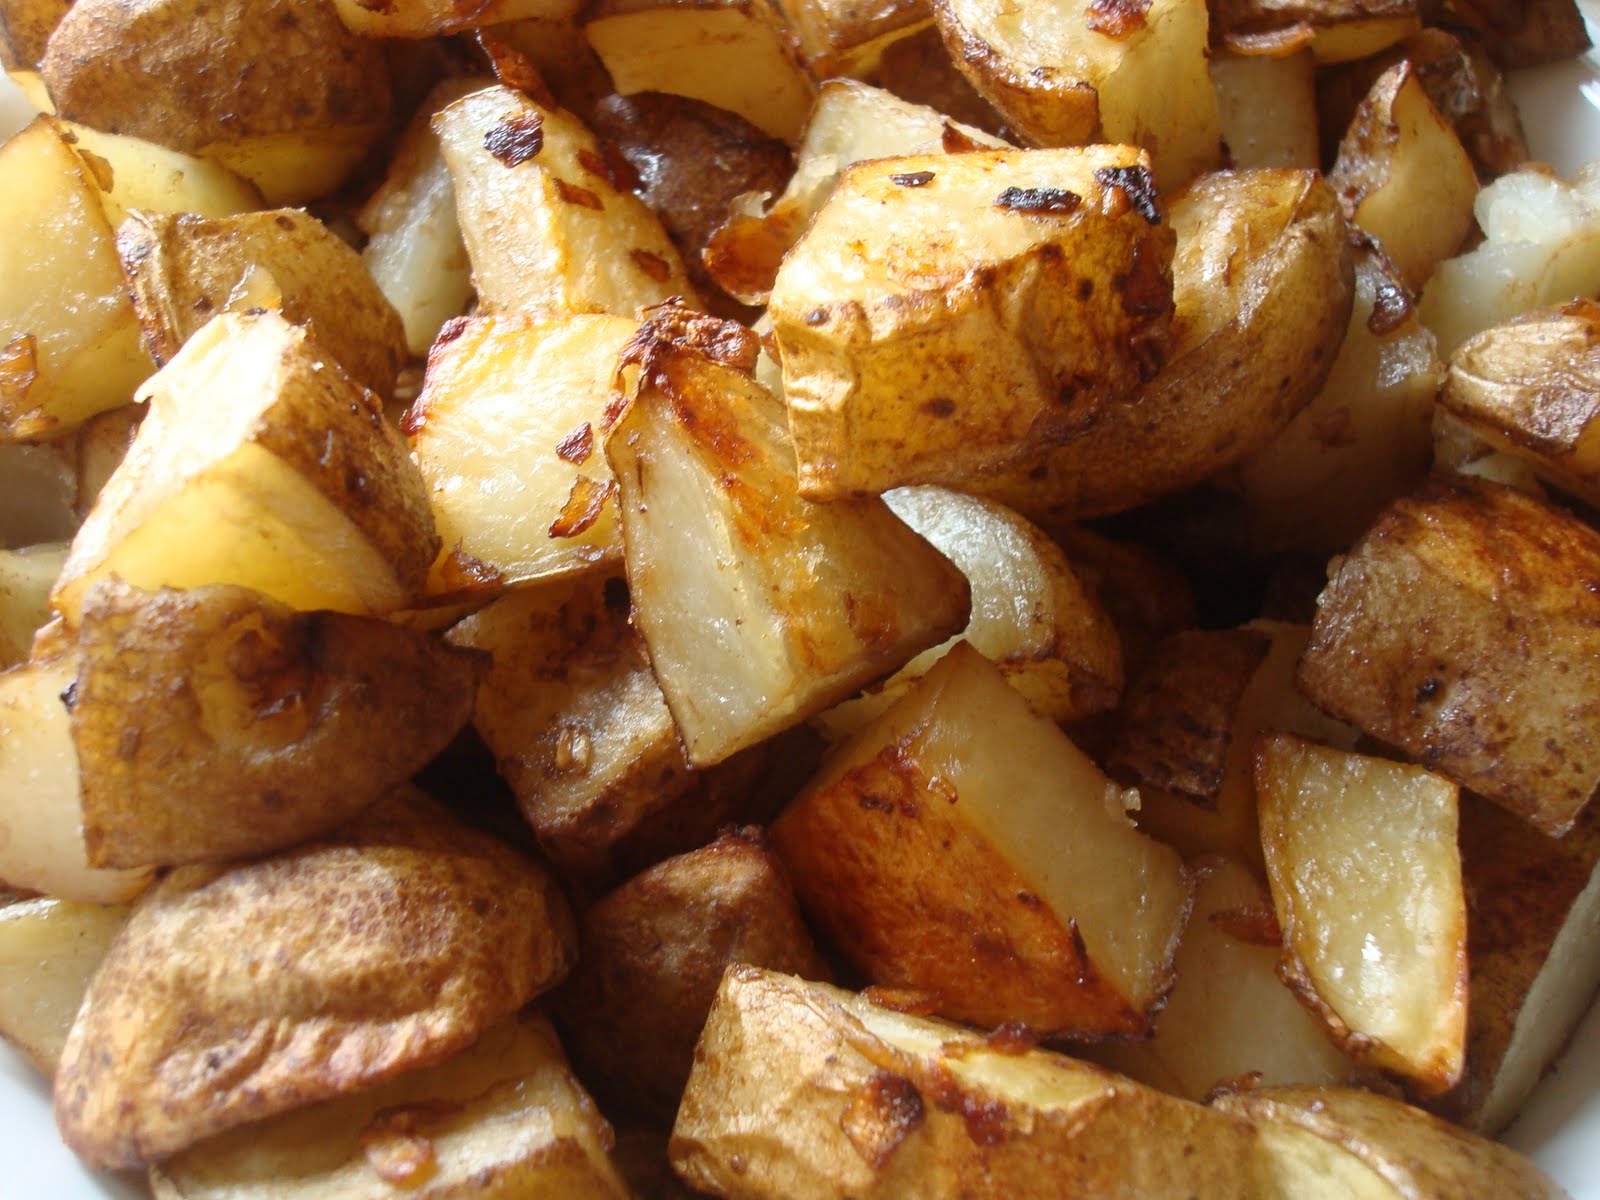 Hot Dinner Happy Home: Onion Roasted Potatoes